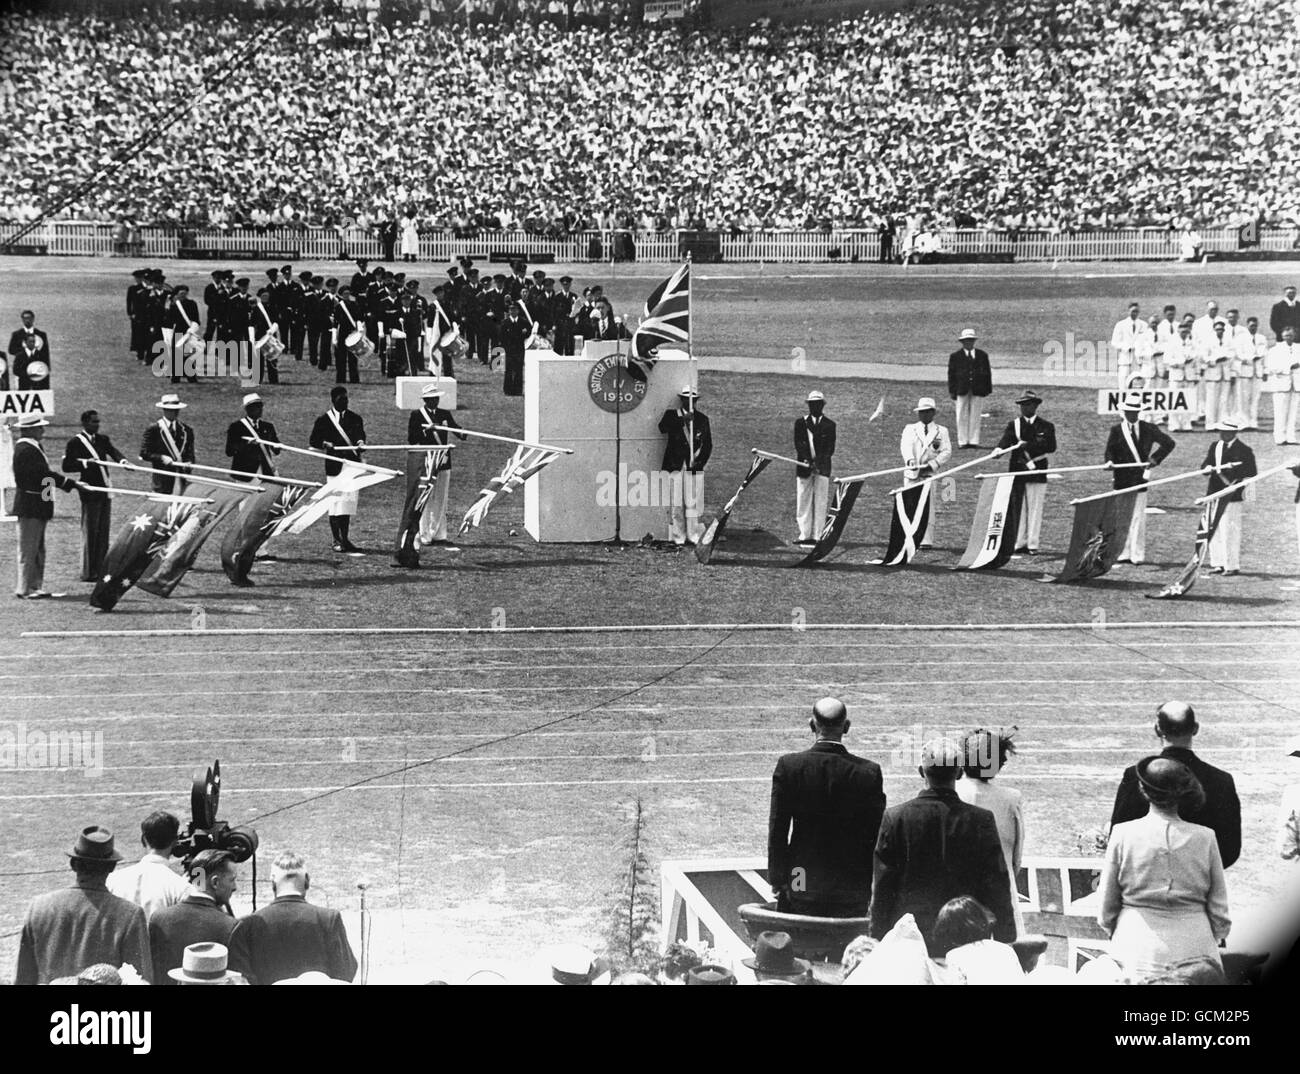 Fourth British Empire Games - Opening Ceremony - Eden Park, Auckland. Stan Lay, New Zealand team Captain taking the oath of amateurism with Empire flags lowered. Stock Photo